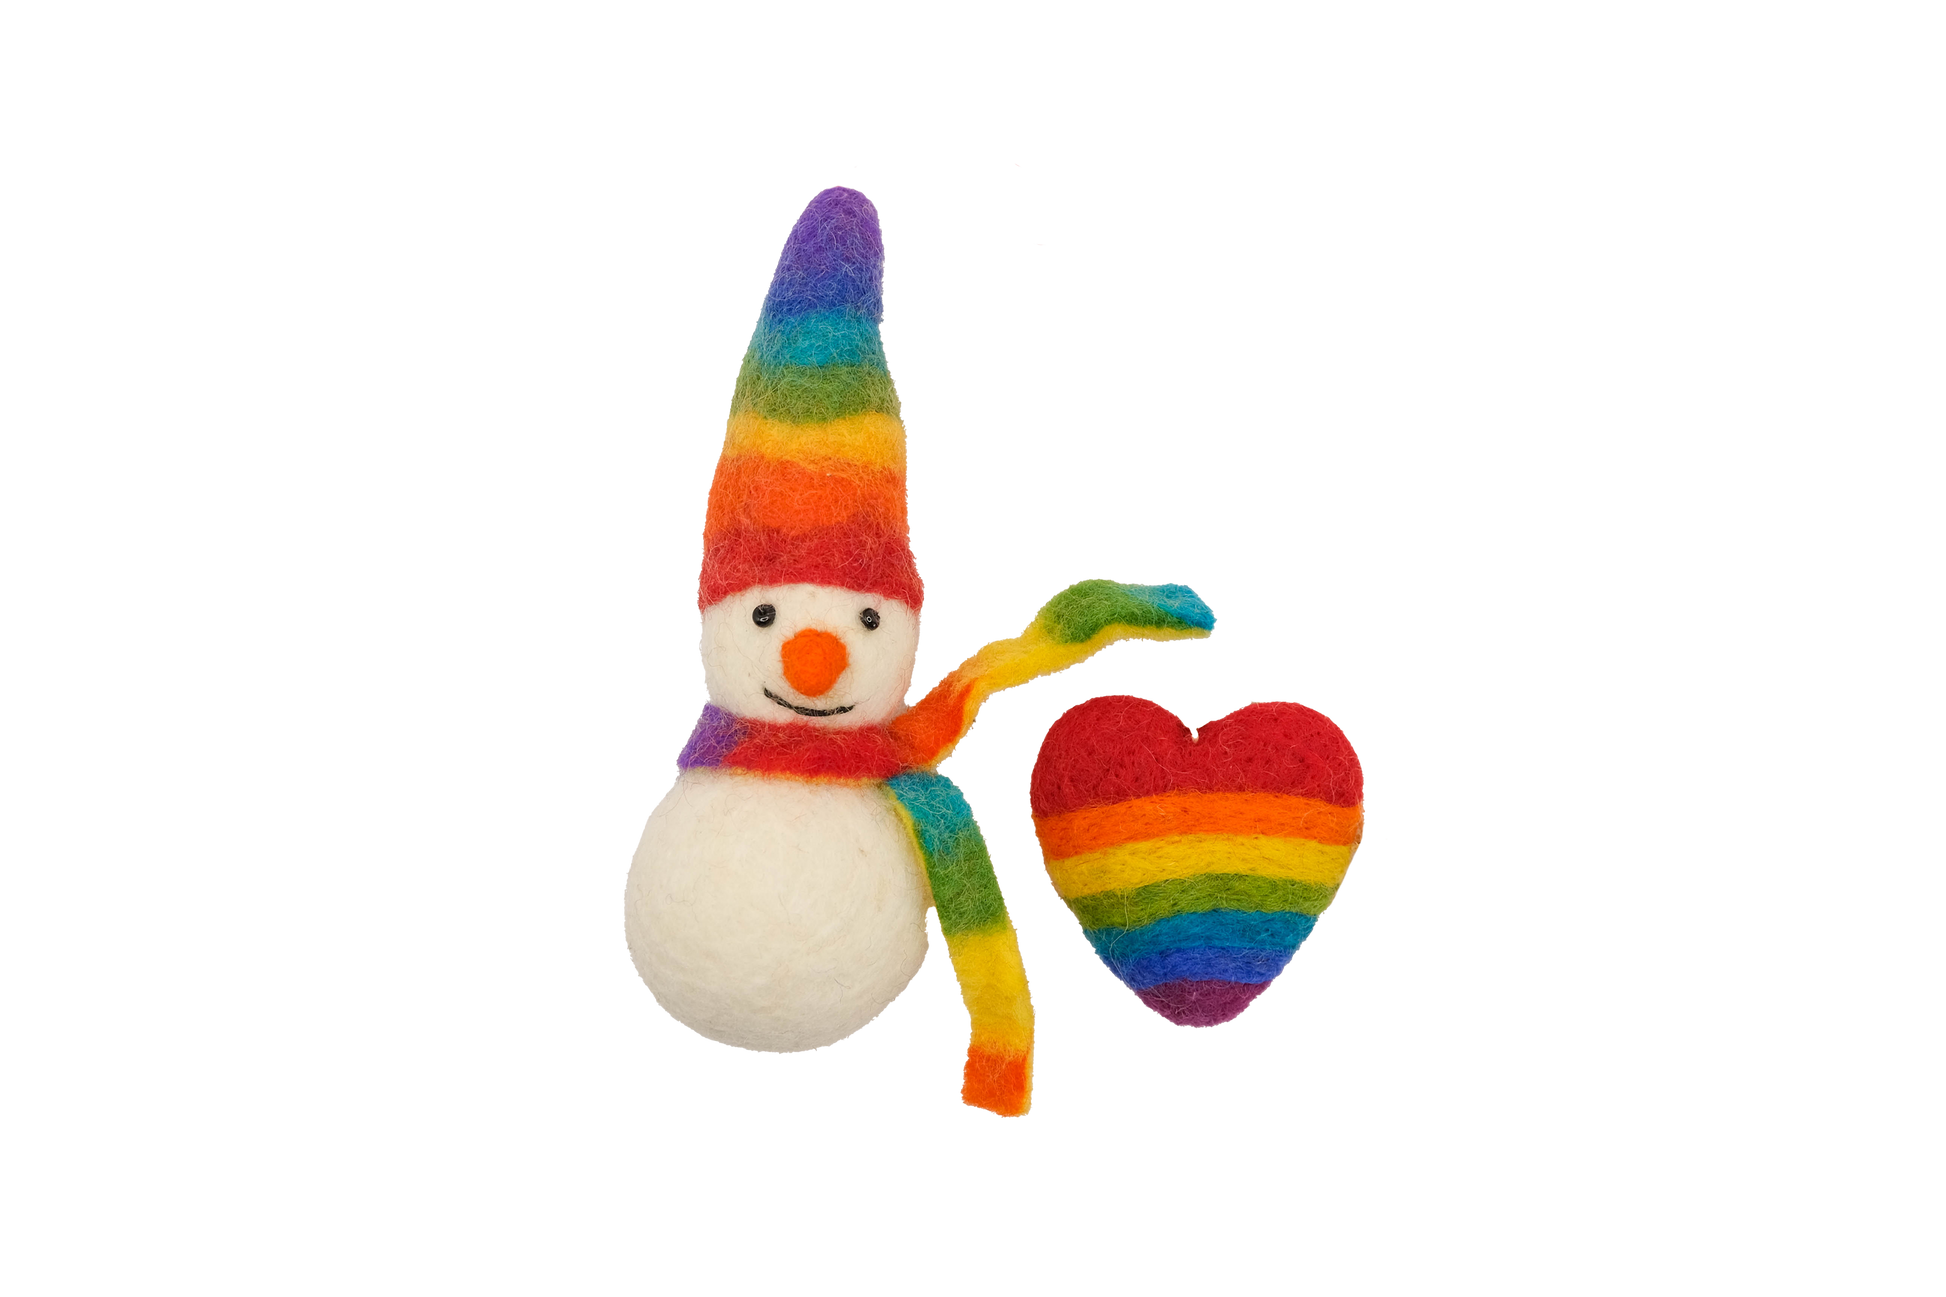 This Global Groove Life, handmade, ethical, fair trade, eco-friendly, sustainable, rainbow felt Frosty the Snow Cone snow man with adorable rainbow heart ornament set was created by artisans in Kathmandu Nepal and will bring colorful warmth and fun to your Christmas tree.